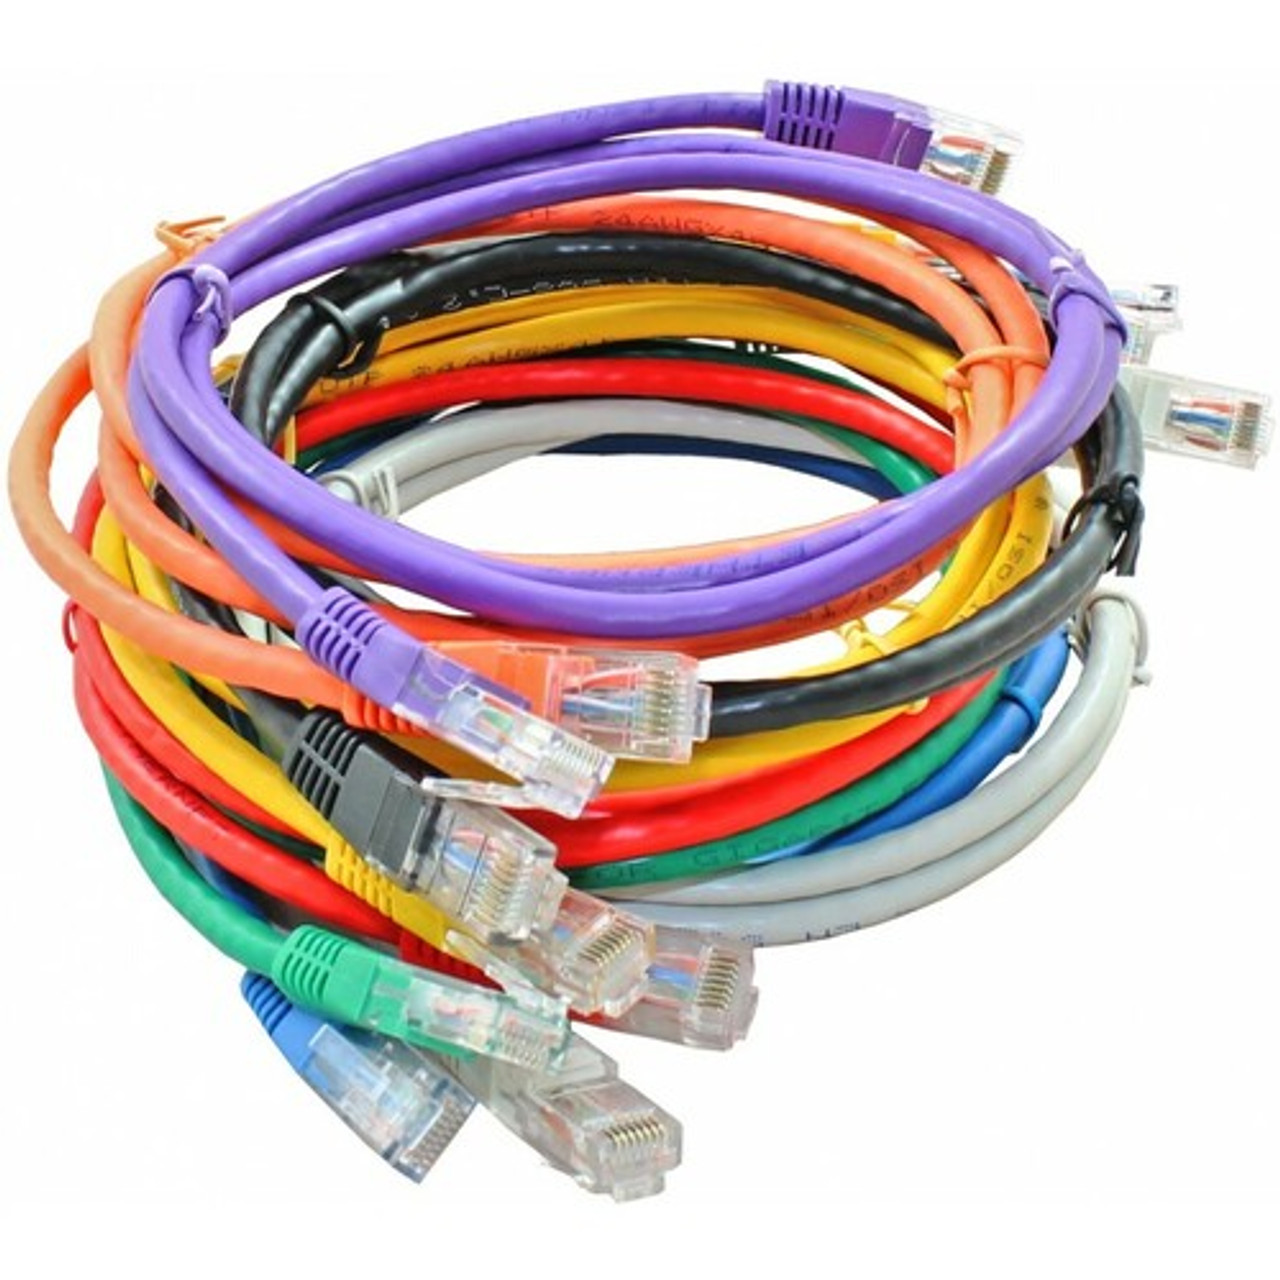 C6ASPAT6BL StarTech.com 6 ft CAT6a Ethernet Cable 10GbE STP Category 6a Network Cable w/Strain Relief Blue Fluke Tested UL/TIA Certified 10 Gigabit Shielded Snagless RJ45 100W PoE Patch Cord 